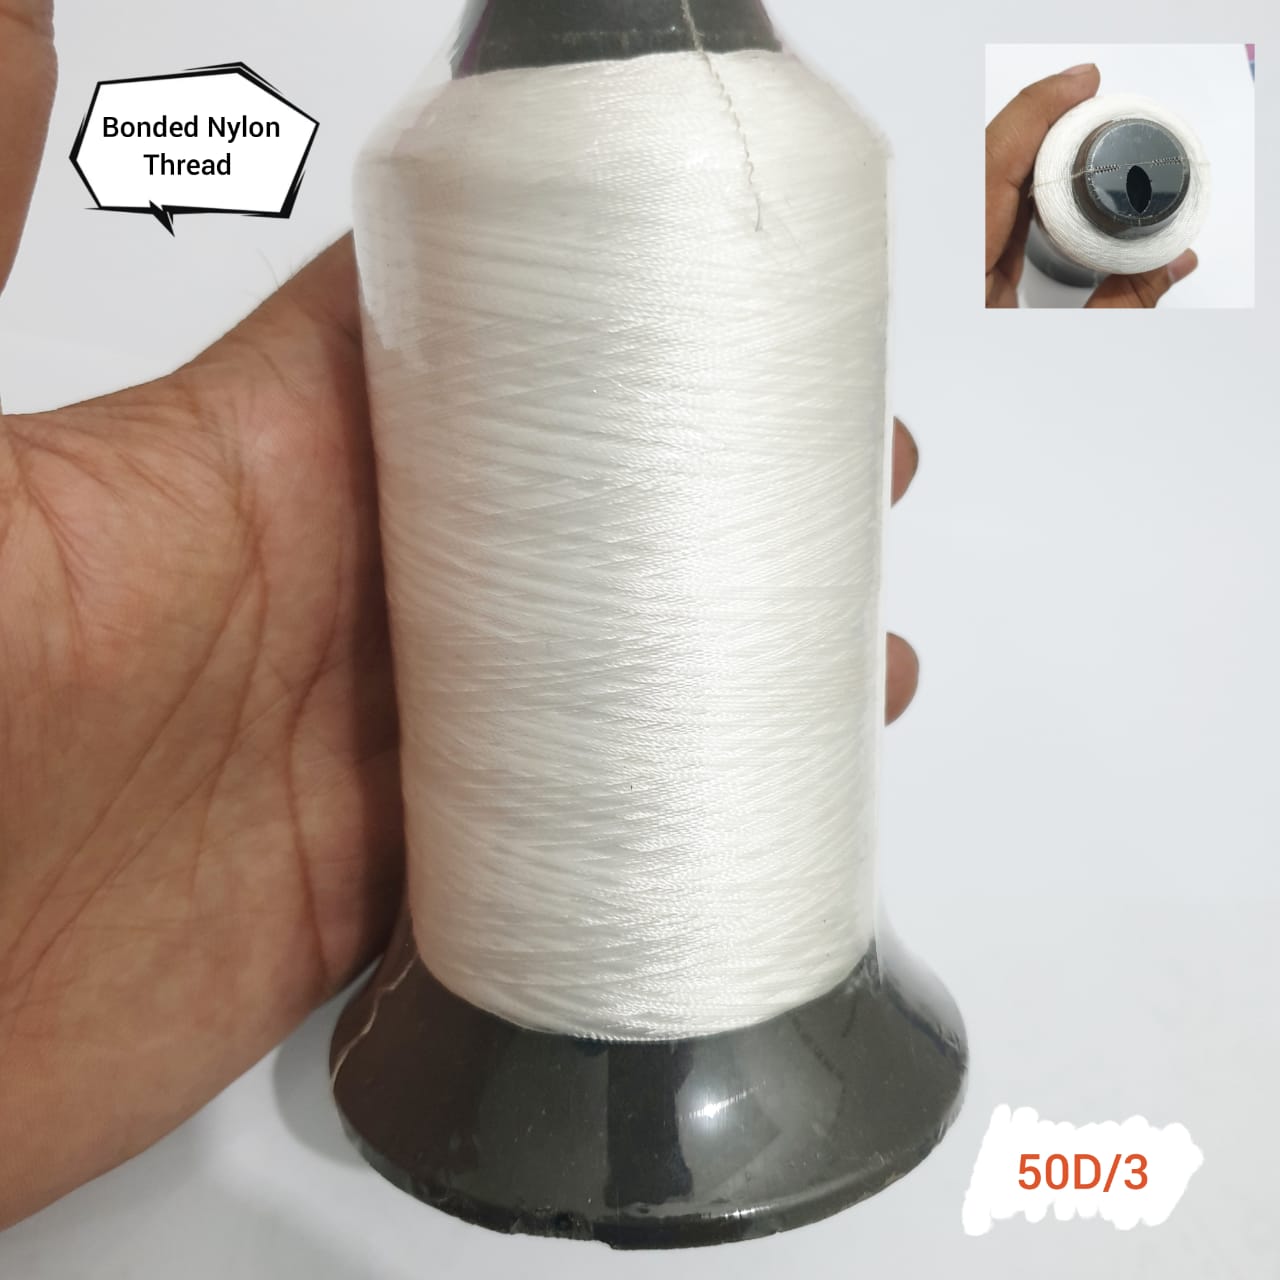 Crafts Bonded Nylon Thread for Sewing Leather, Upholstery, Jeans and  Weaving Hair; Heavy-Duty;50D/3